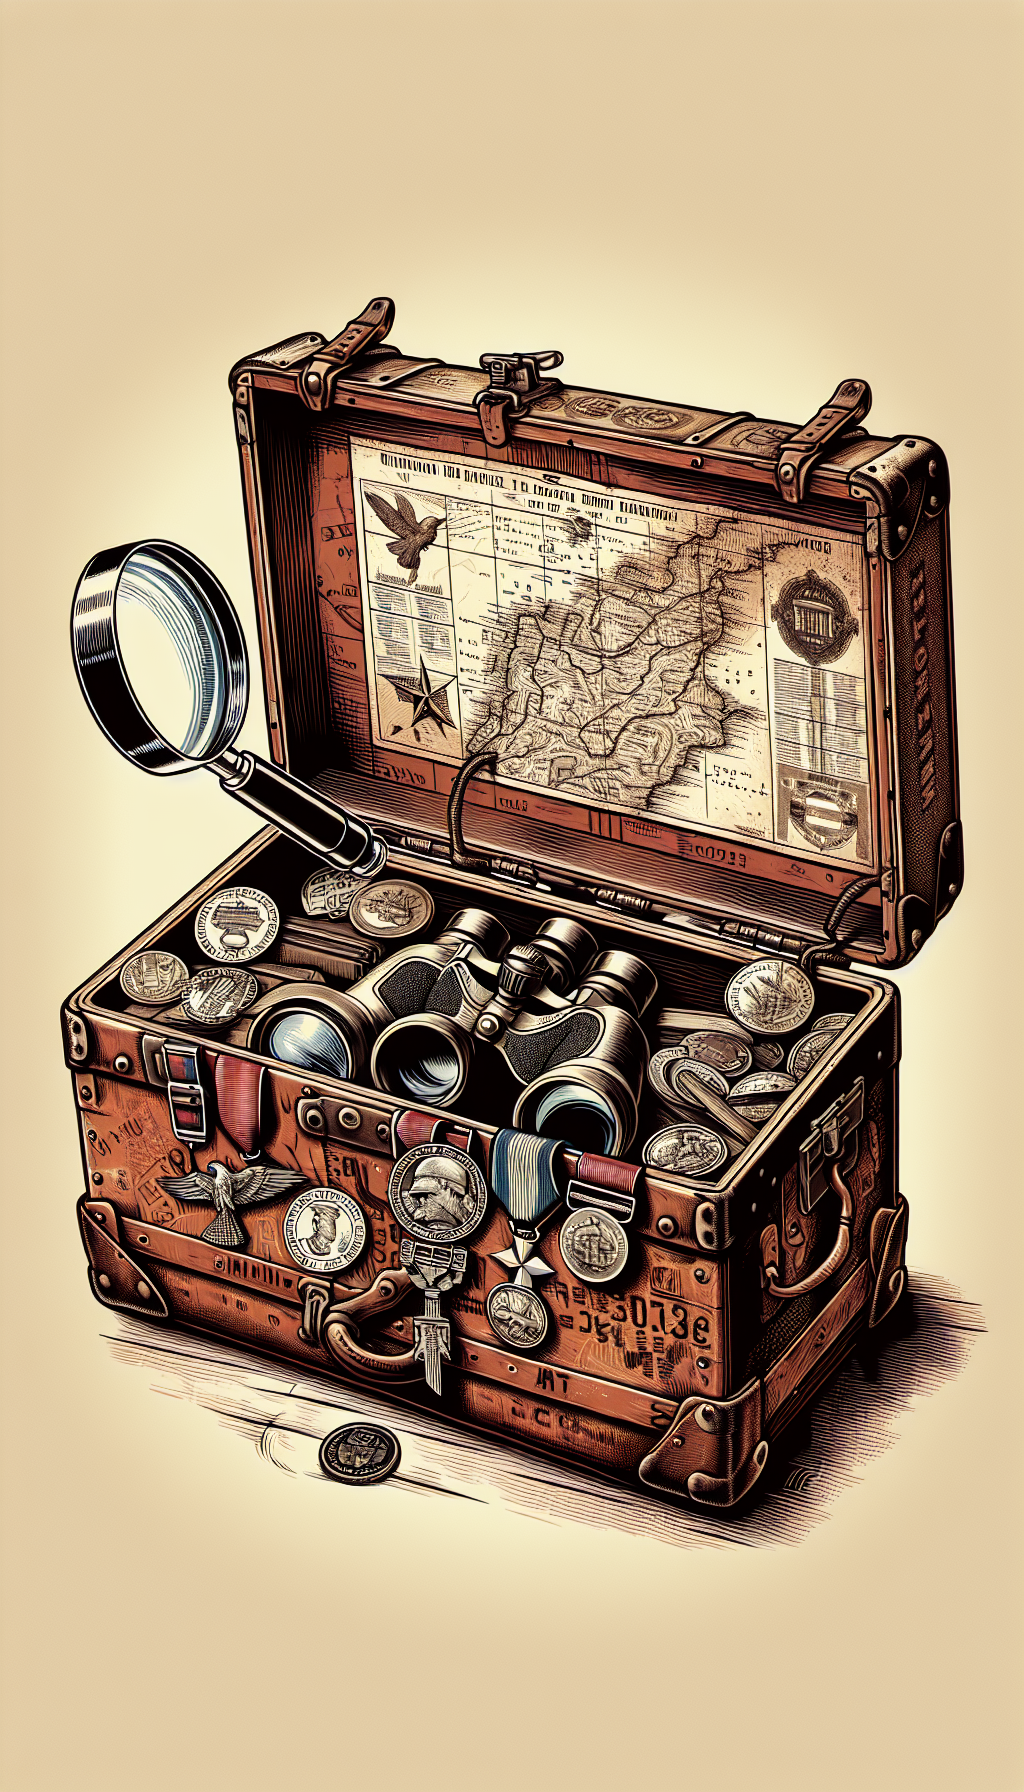 An intricately illustrated vintage military trunk, half open, with historical campaign memorabilia spilling out: faded maps, binoculars, medals, and a magnifying glass hovering above – highlighting identifiers like unit insignia and dates etched on the trunk. The scene, split in styles, transitions from sepia-toned realism on one side to stylized graphic outlines on the other, symbolizing the journey from past to collectible present.